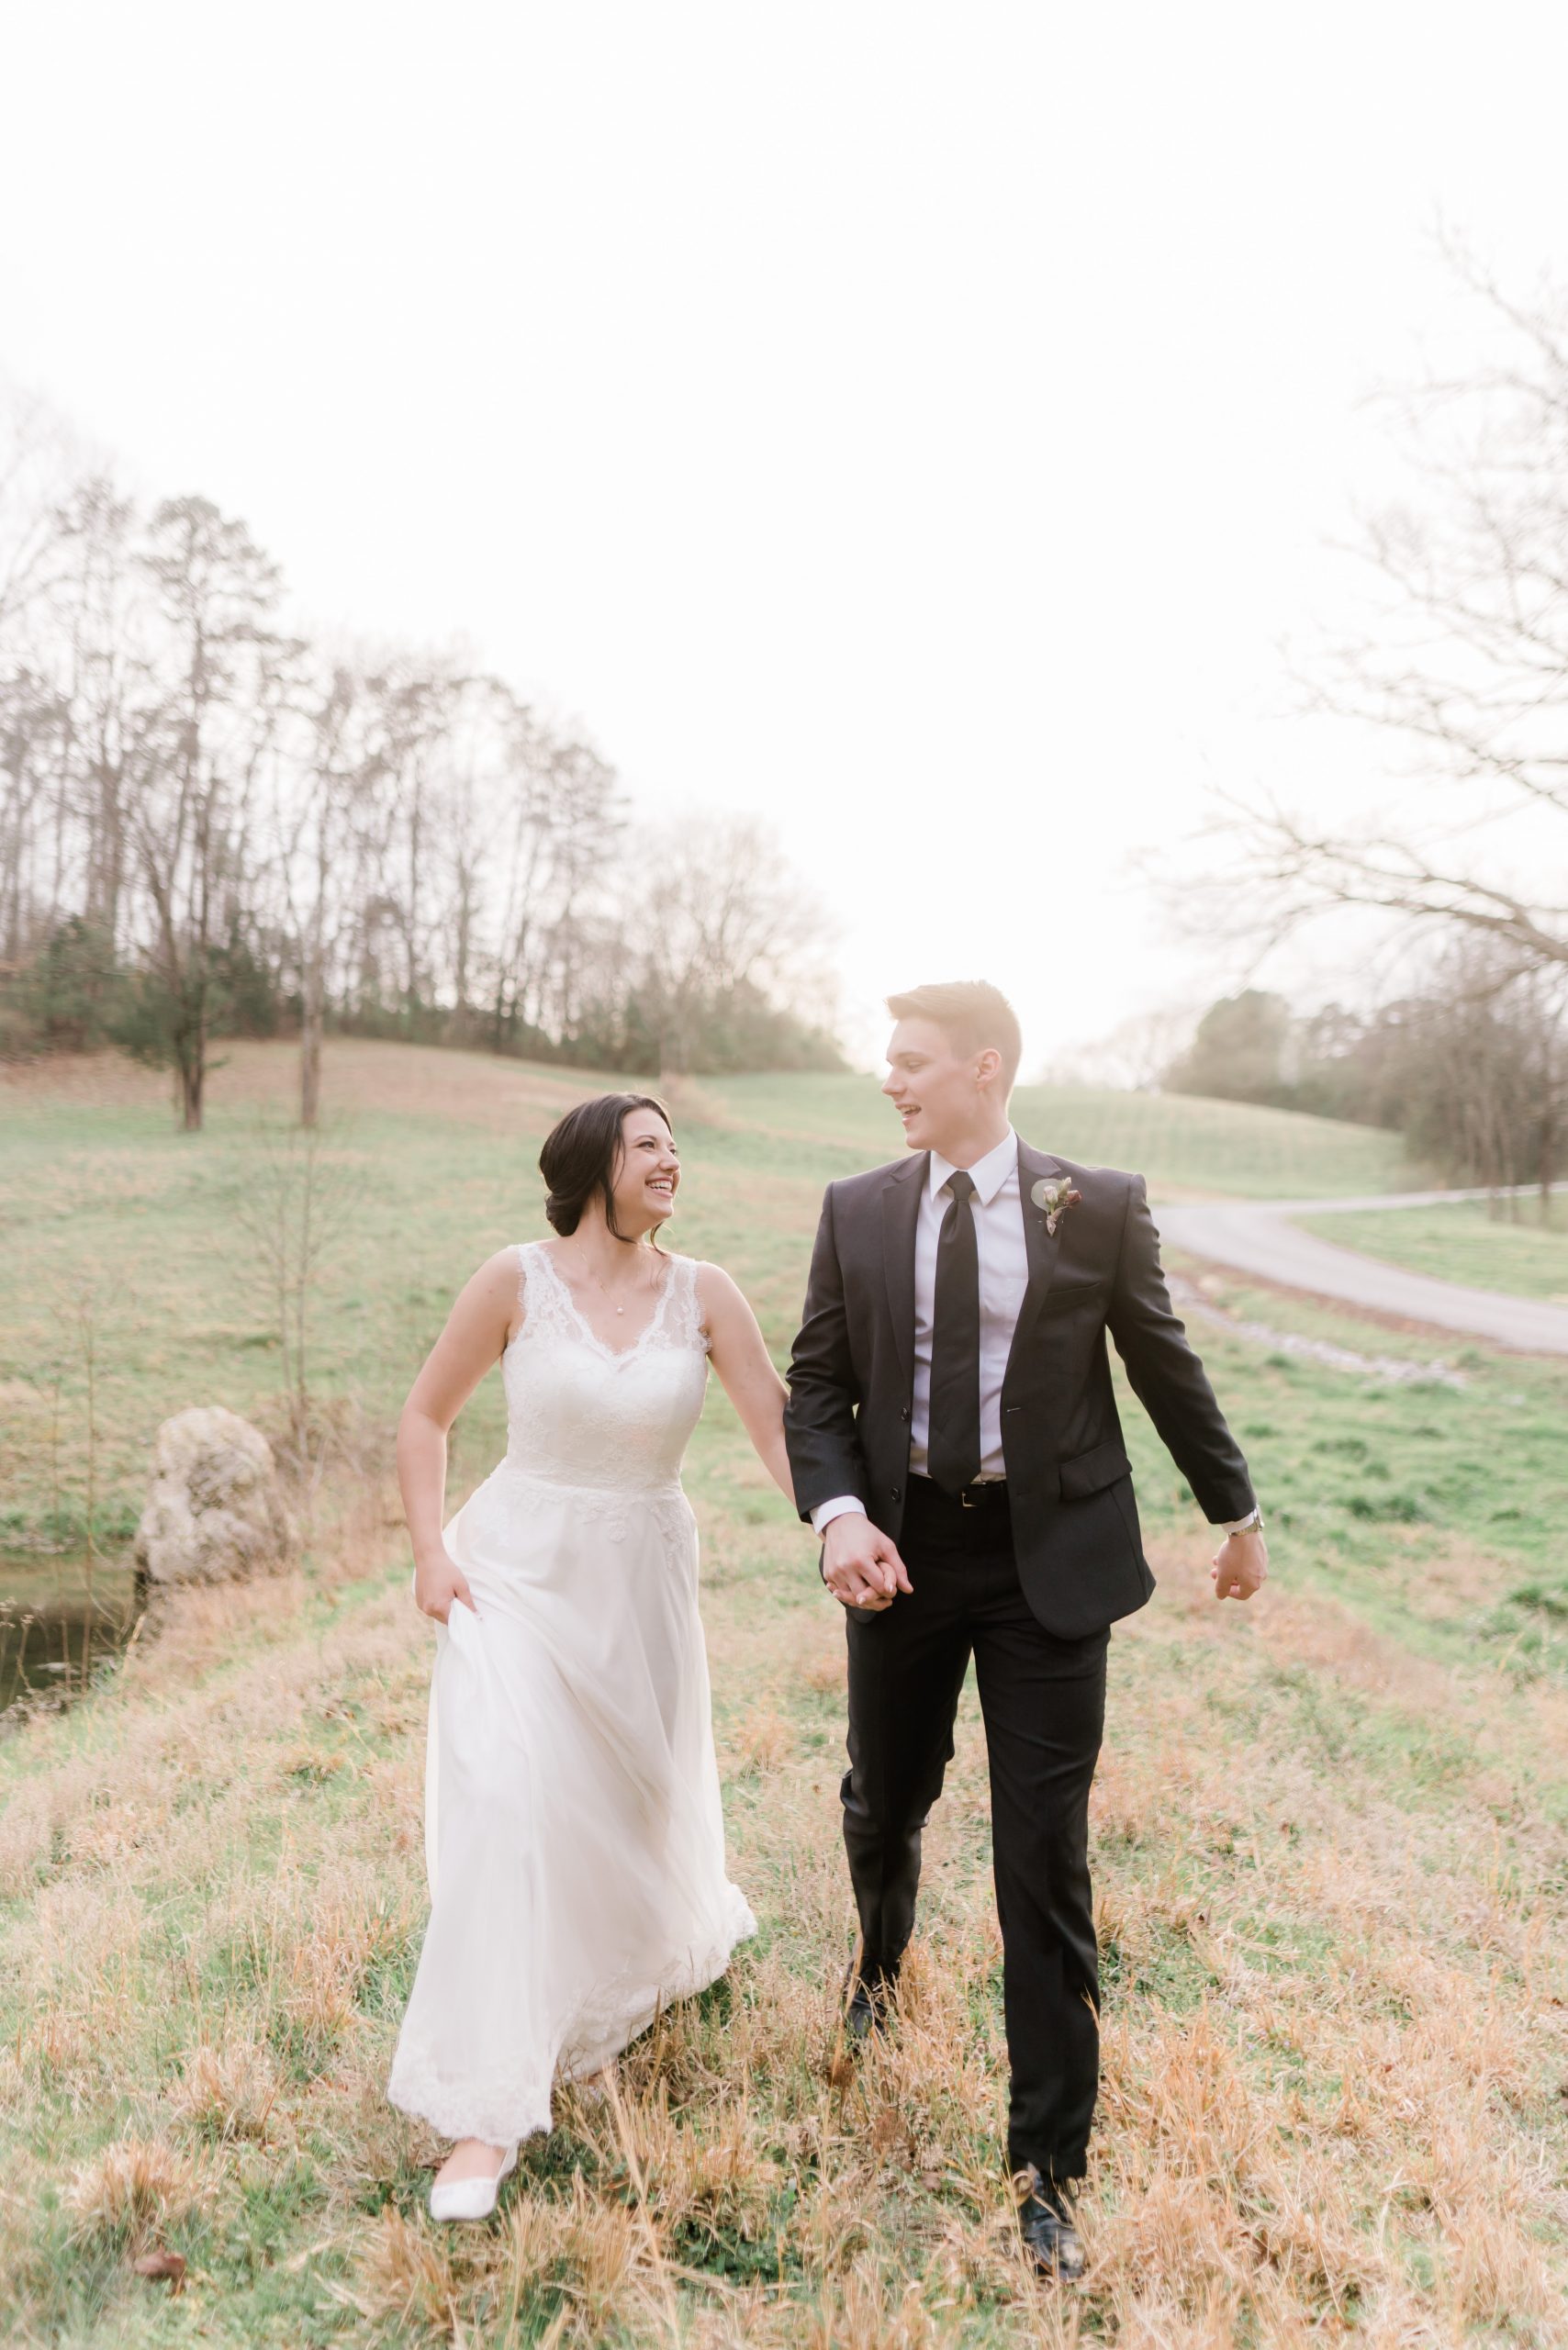 At Home Wedding for Laura & Robert by alyssa rachelle photography